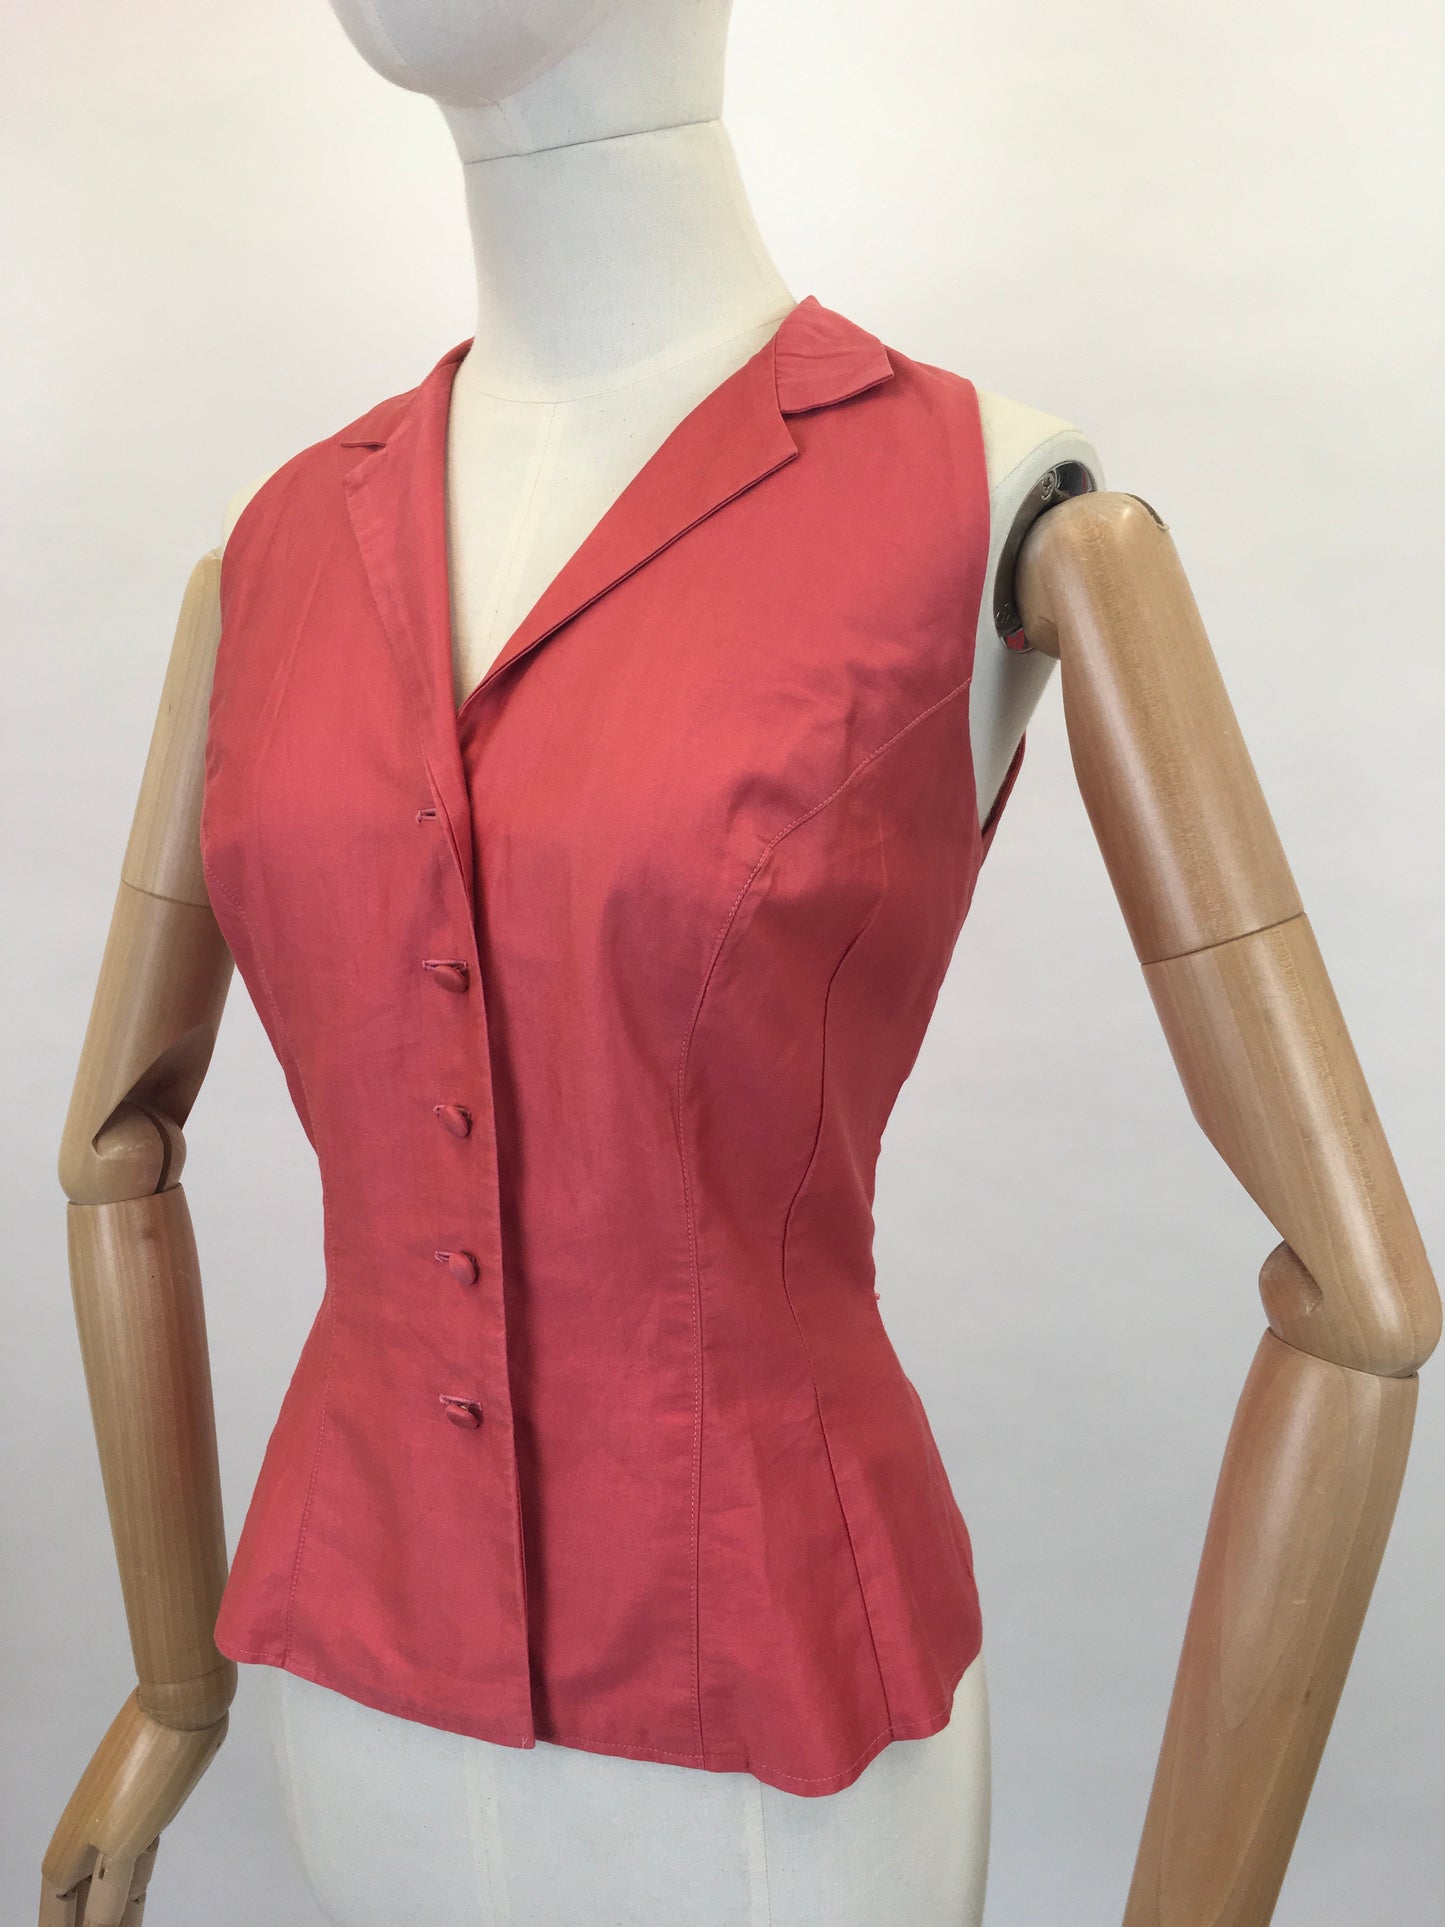 Original 1950s Deep Coral Cotton Blouse - In a Classic 50’s Silhouette